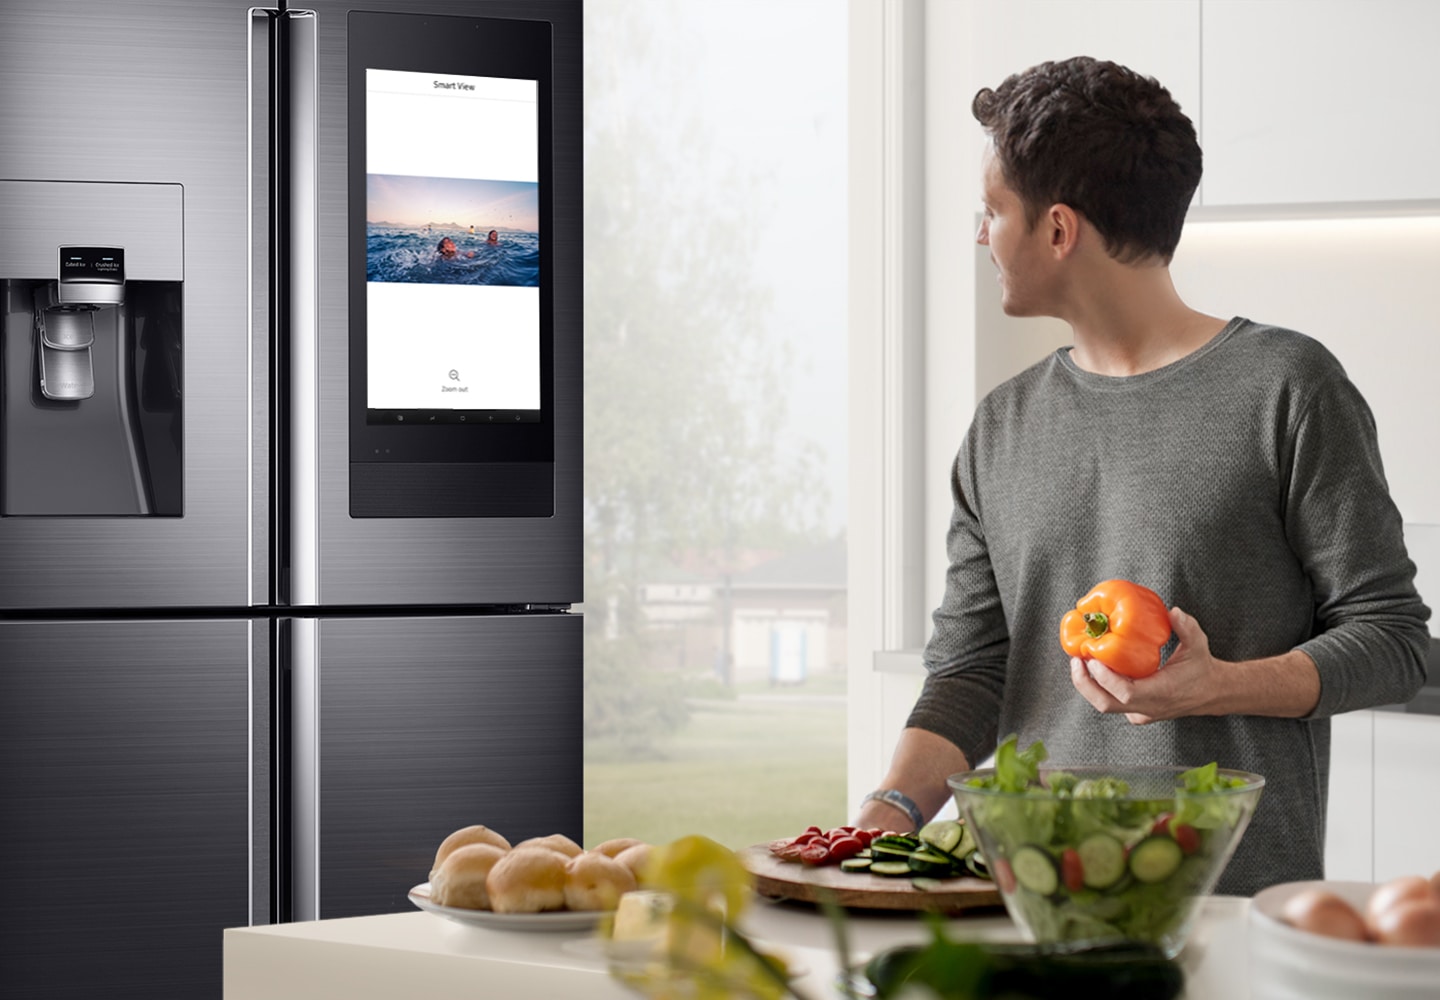 Mirror your Samsung smartphone or TV, right on your fridge